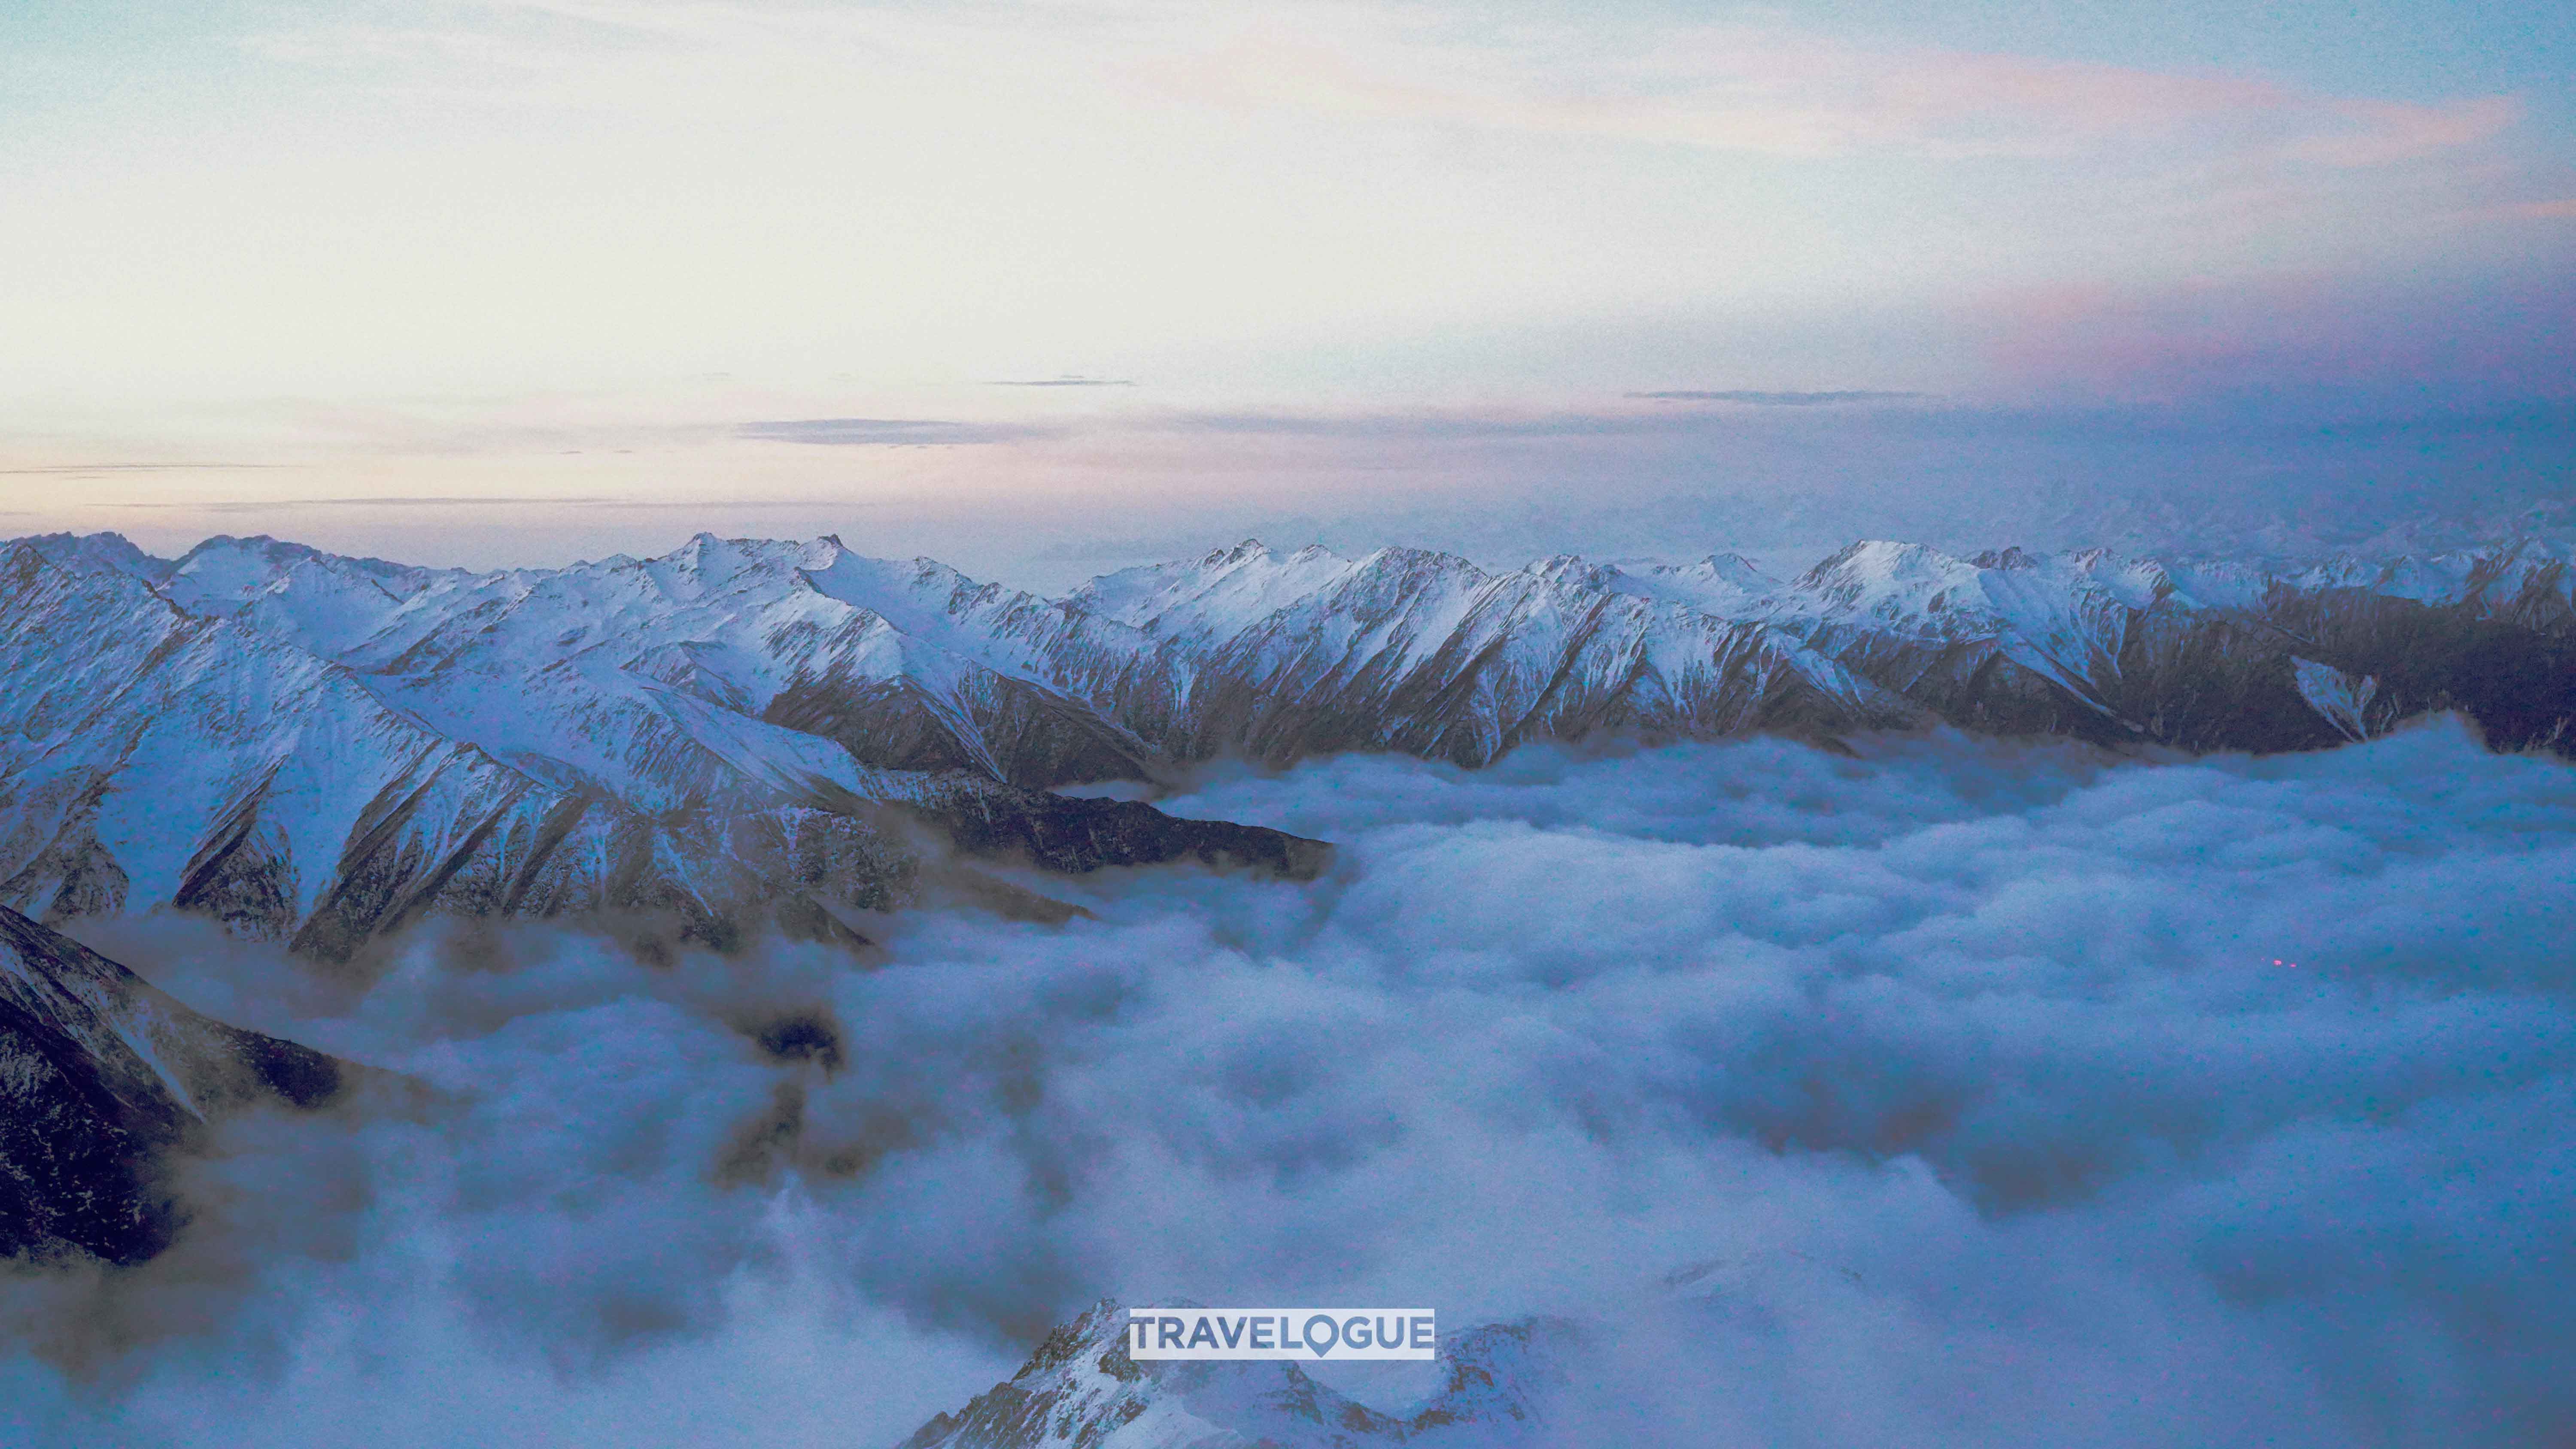 Seas of clouds form beneath the First Peak of Mount Siguniang in southwest China's Sichuan Province. /CGTN